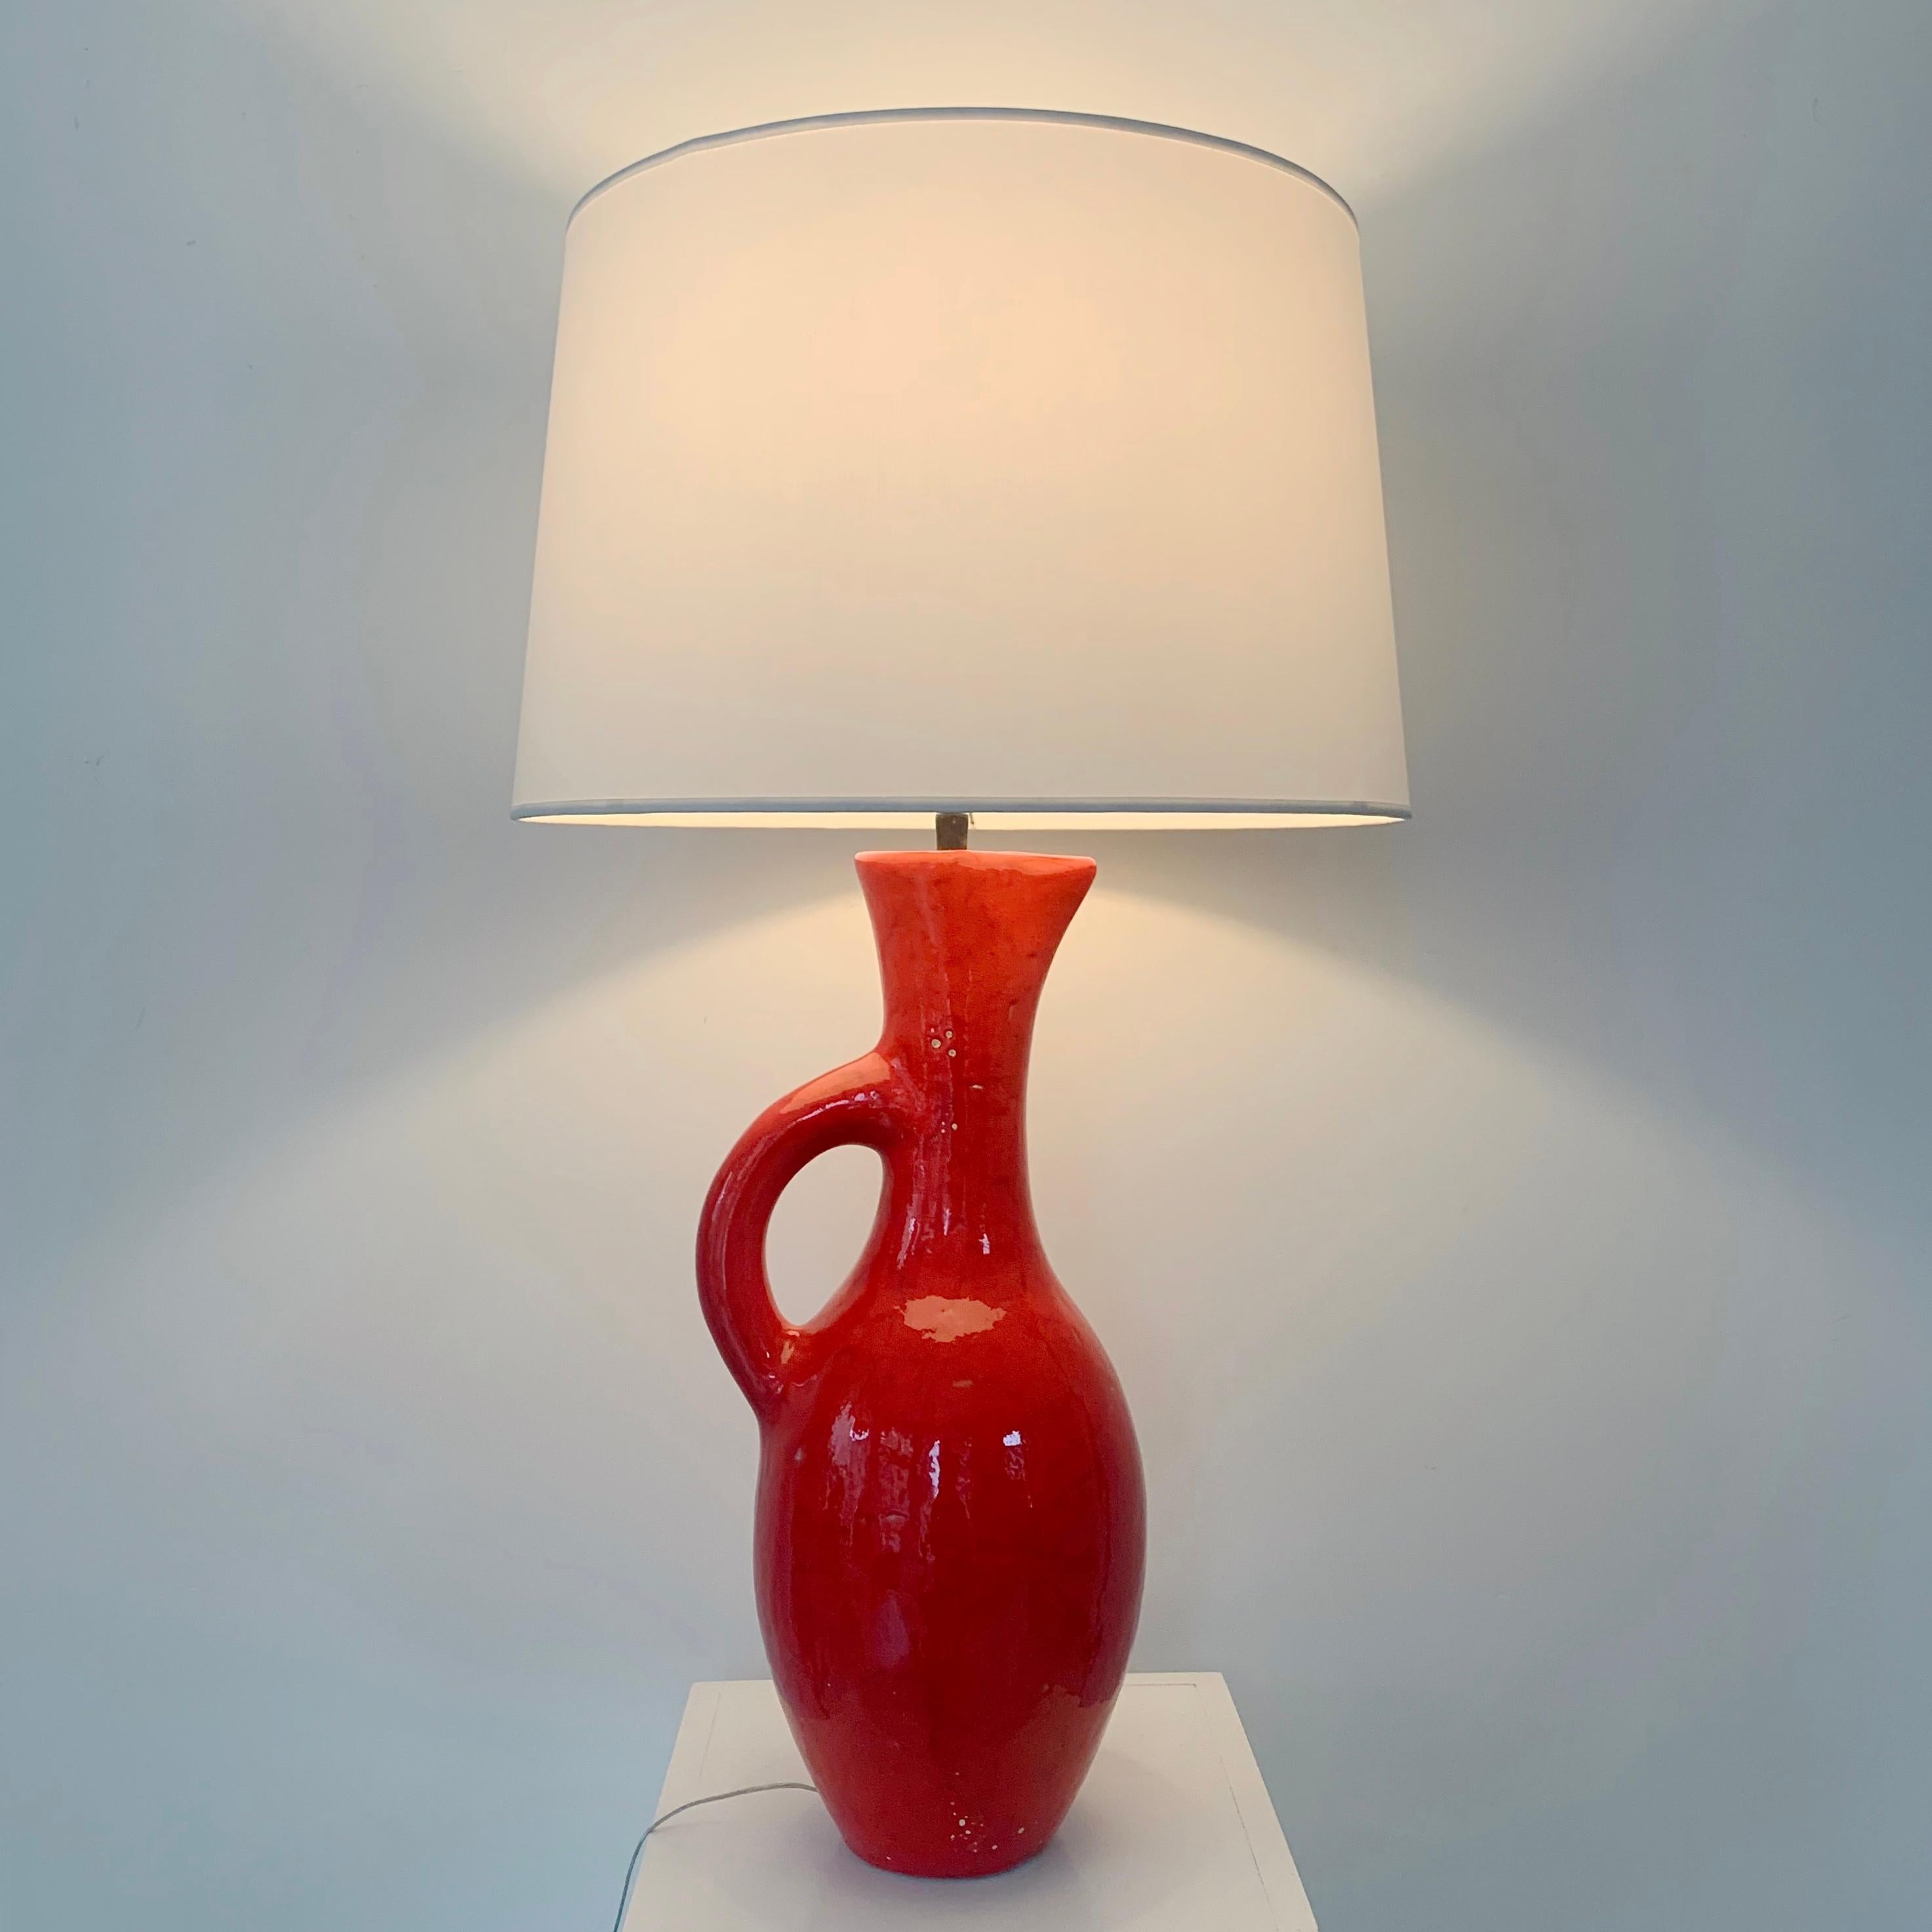 Les Archanges / Gilbert Valentin ceramic table lamp, circa 1950, Vallauris, France.
Large red enameled earthenware pitcher, new white fabric shade.
Incised underneath Gilbert Valentin Les Archanges Vallauris .
Dimensions: total height: 74 cm, height